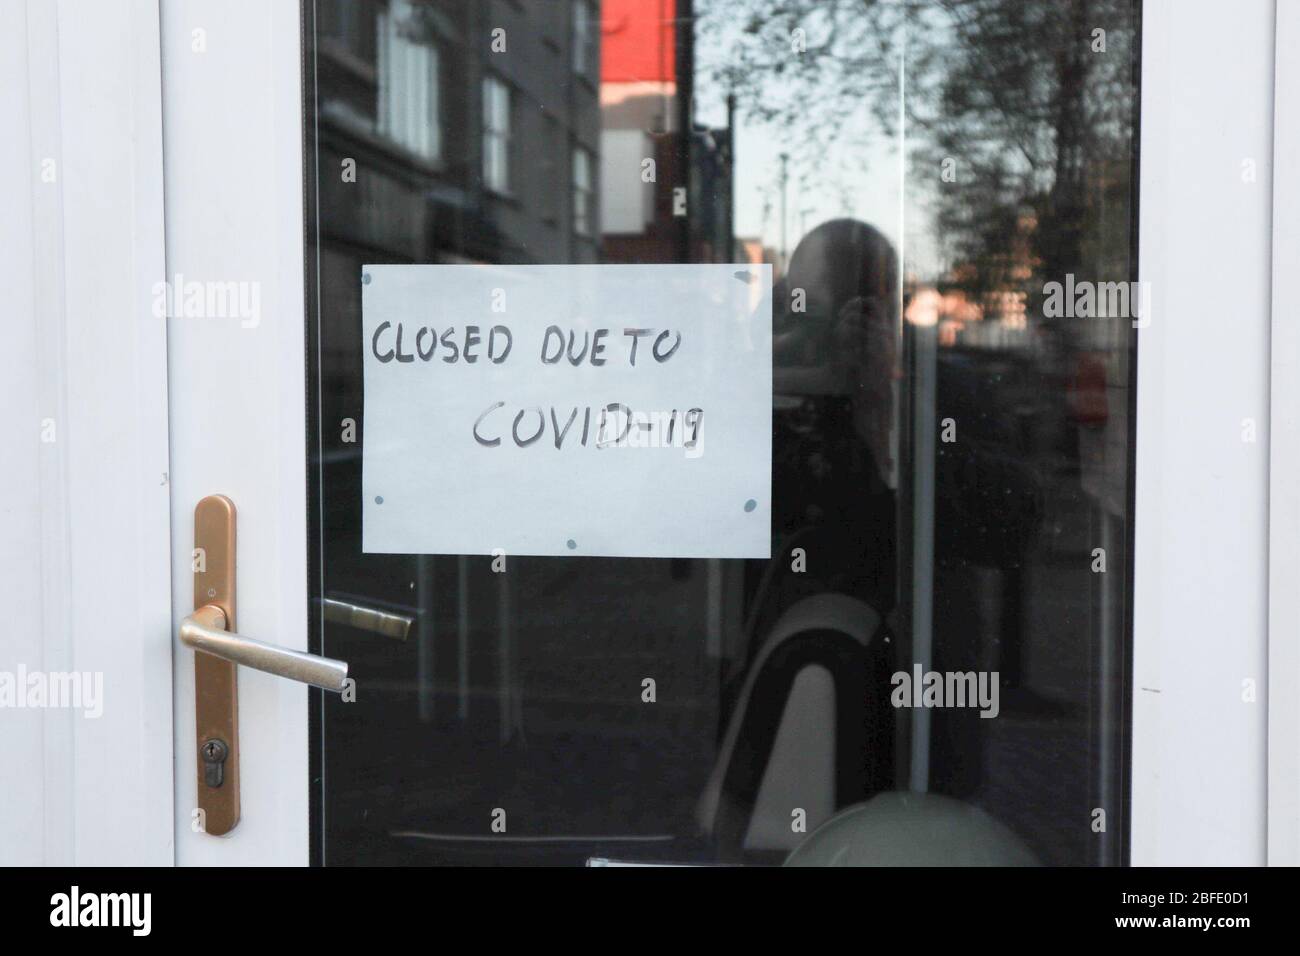 West End, Morecambe, Lancashire, United Kingdom. 17th Apr, 2020. Shops in the West End of Morecambe have been closed due to the current outbreak of COVID19 Credit: Photographing North/Alamy Live News Stock Photo